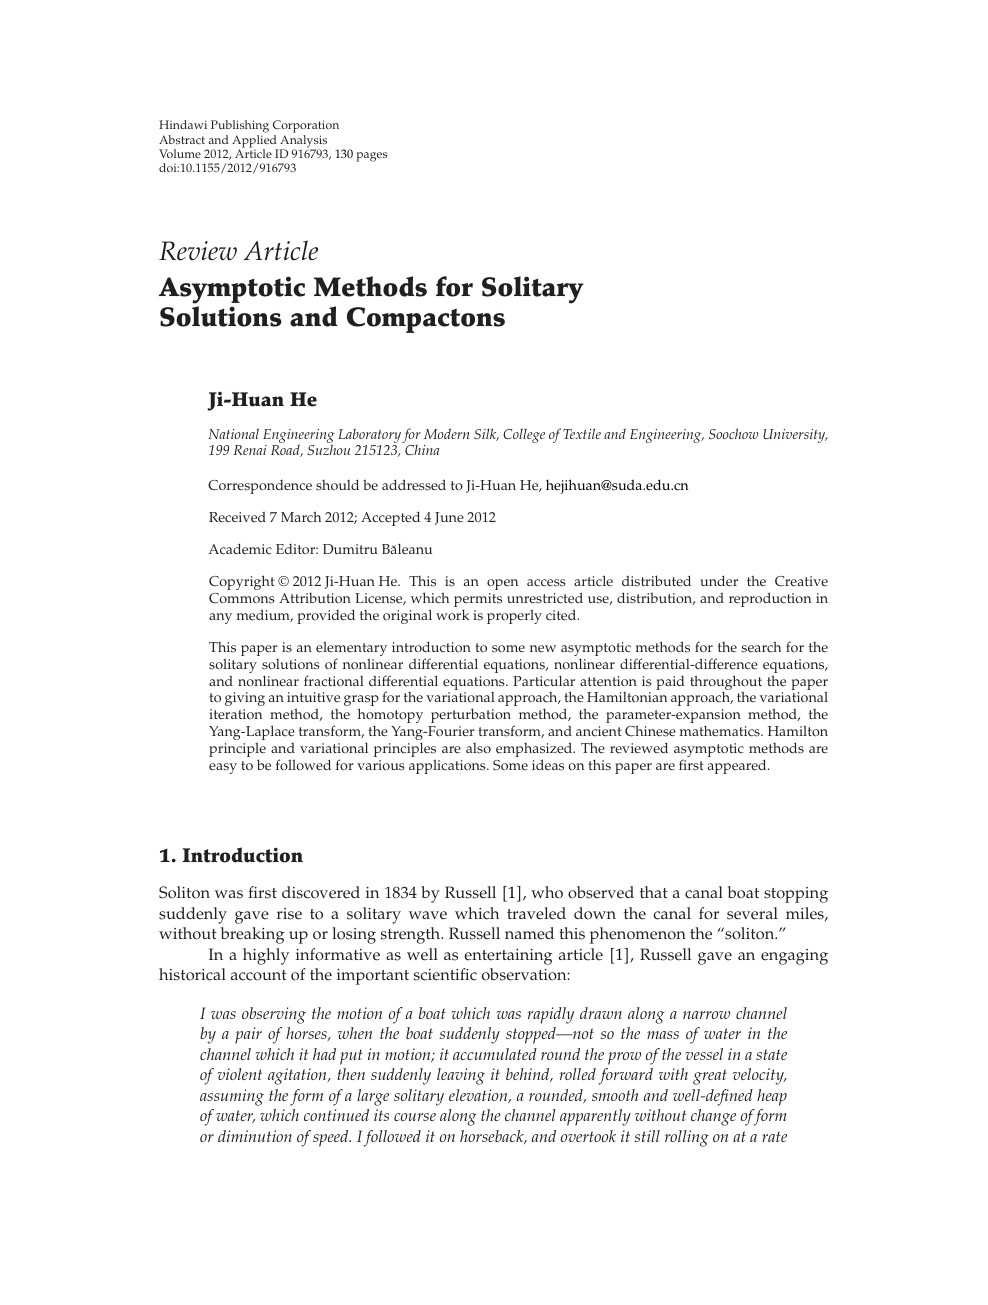 Asymptotic Methods For Solitary Solutions And Compactons Topic Of Research Paper In Mathematics Download Scholarly Article Pdf And Read For Free On Cyberleninka Open Science Hub